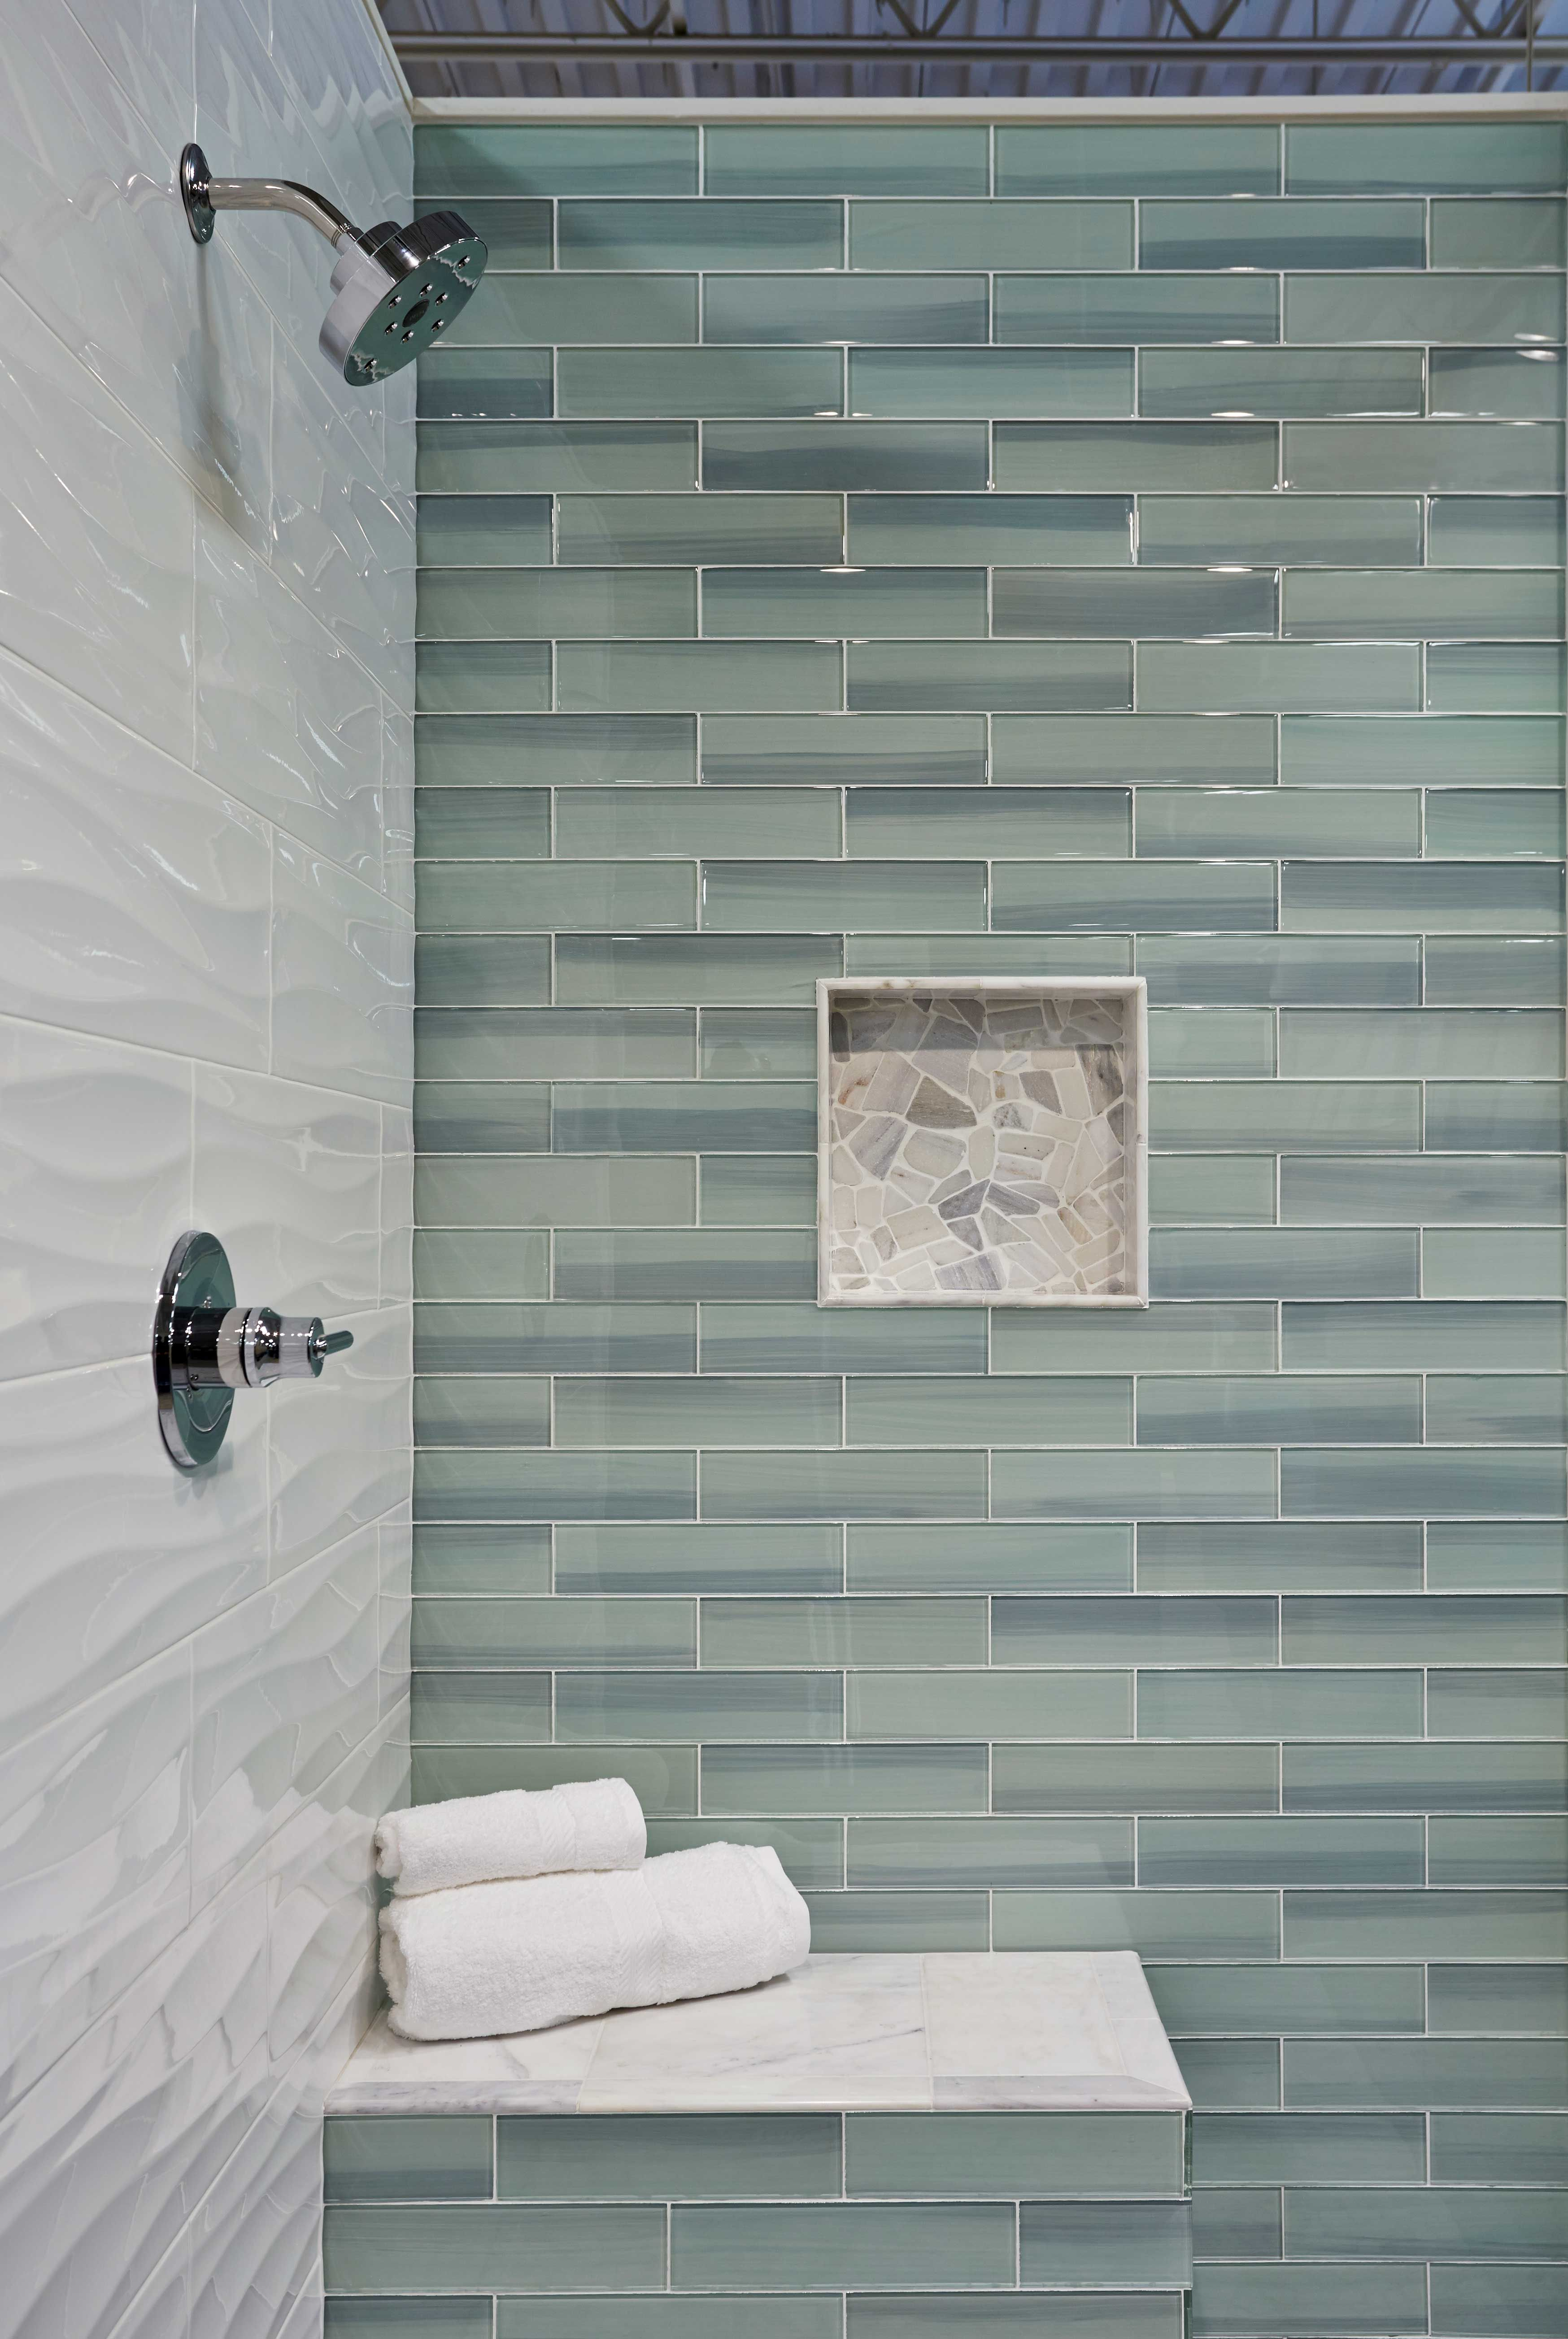 Bathroom Shower Wall Tile New Haven Glass Subway Tile Subway pertaining to size 3496 X 5215